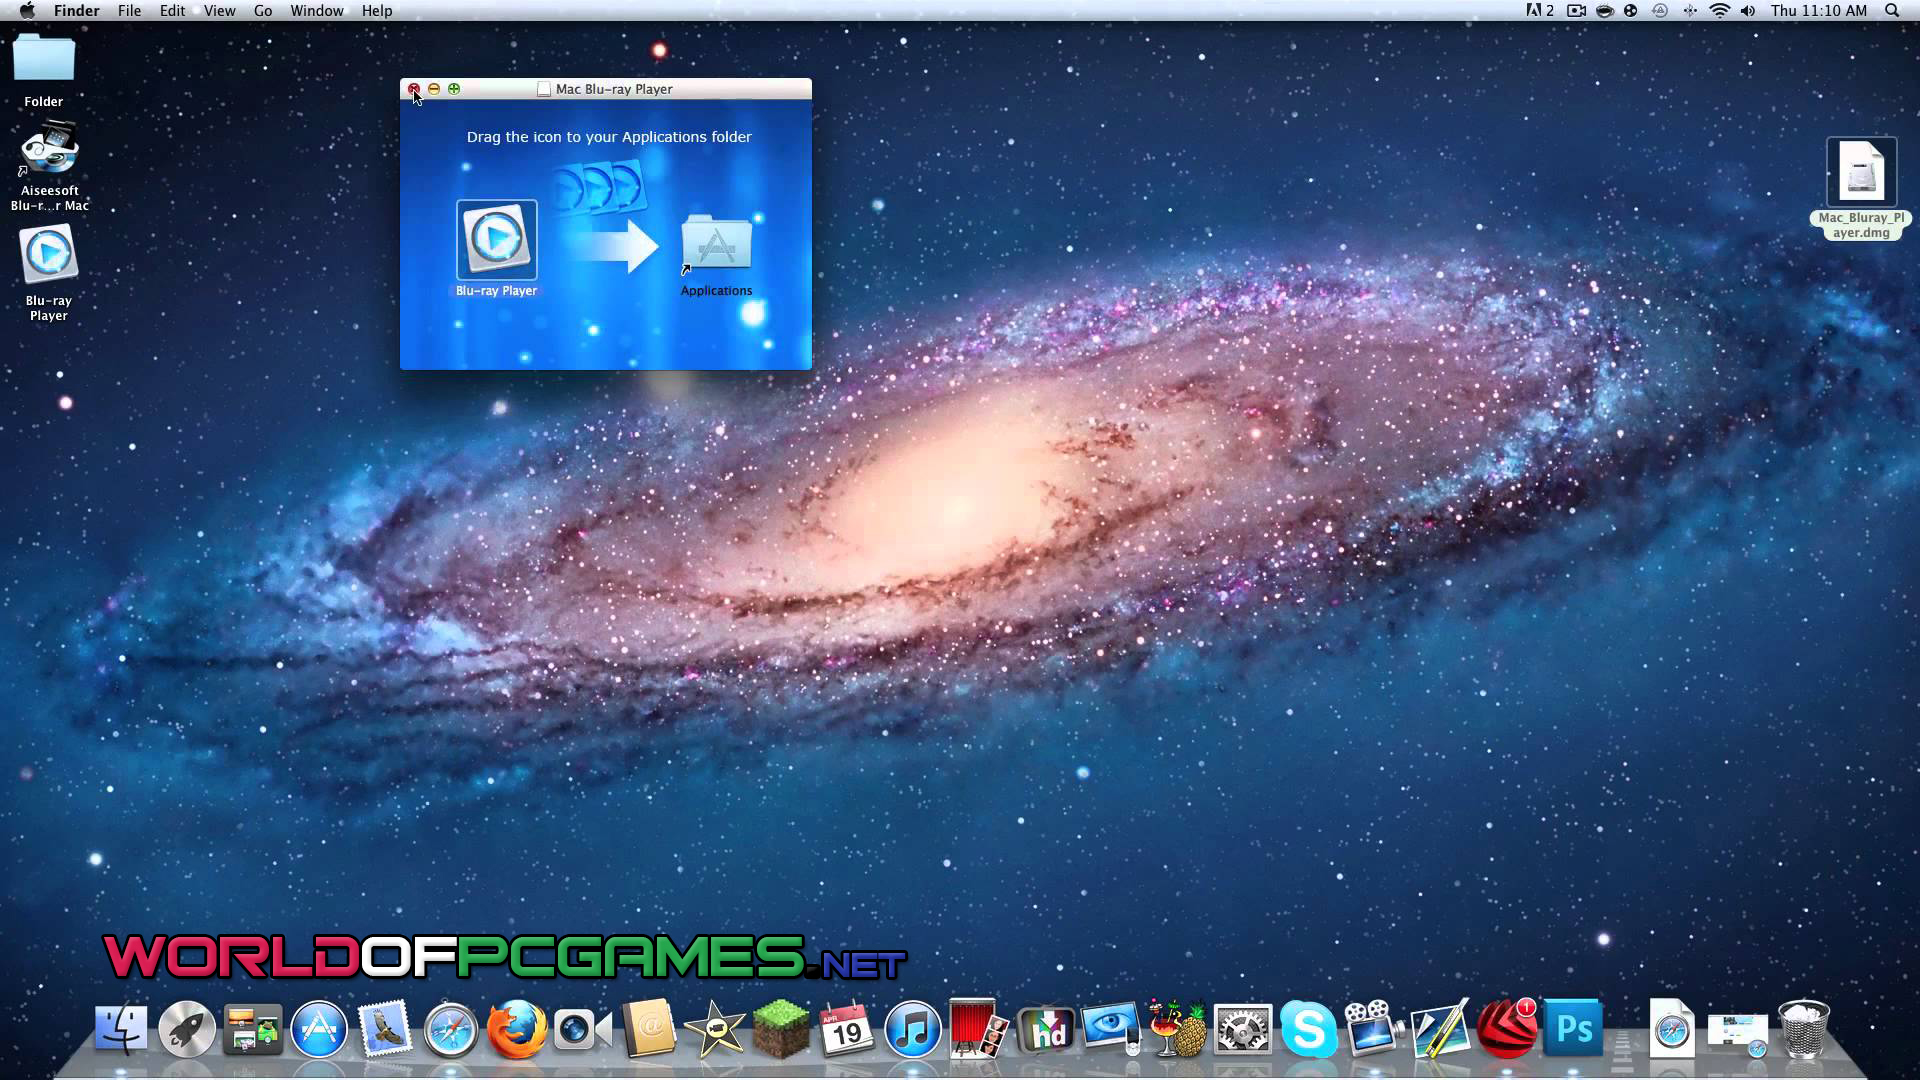 10.7.5 uodate for mac os campatible with youtube?